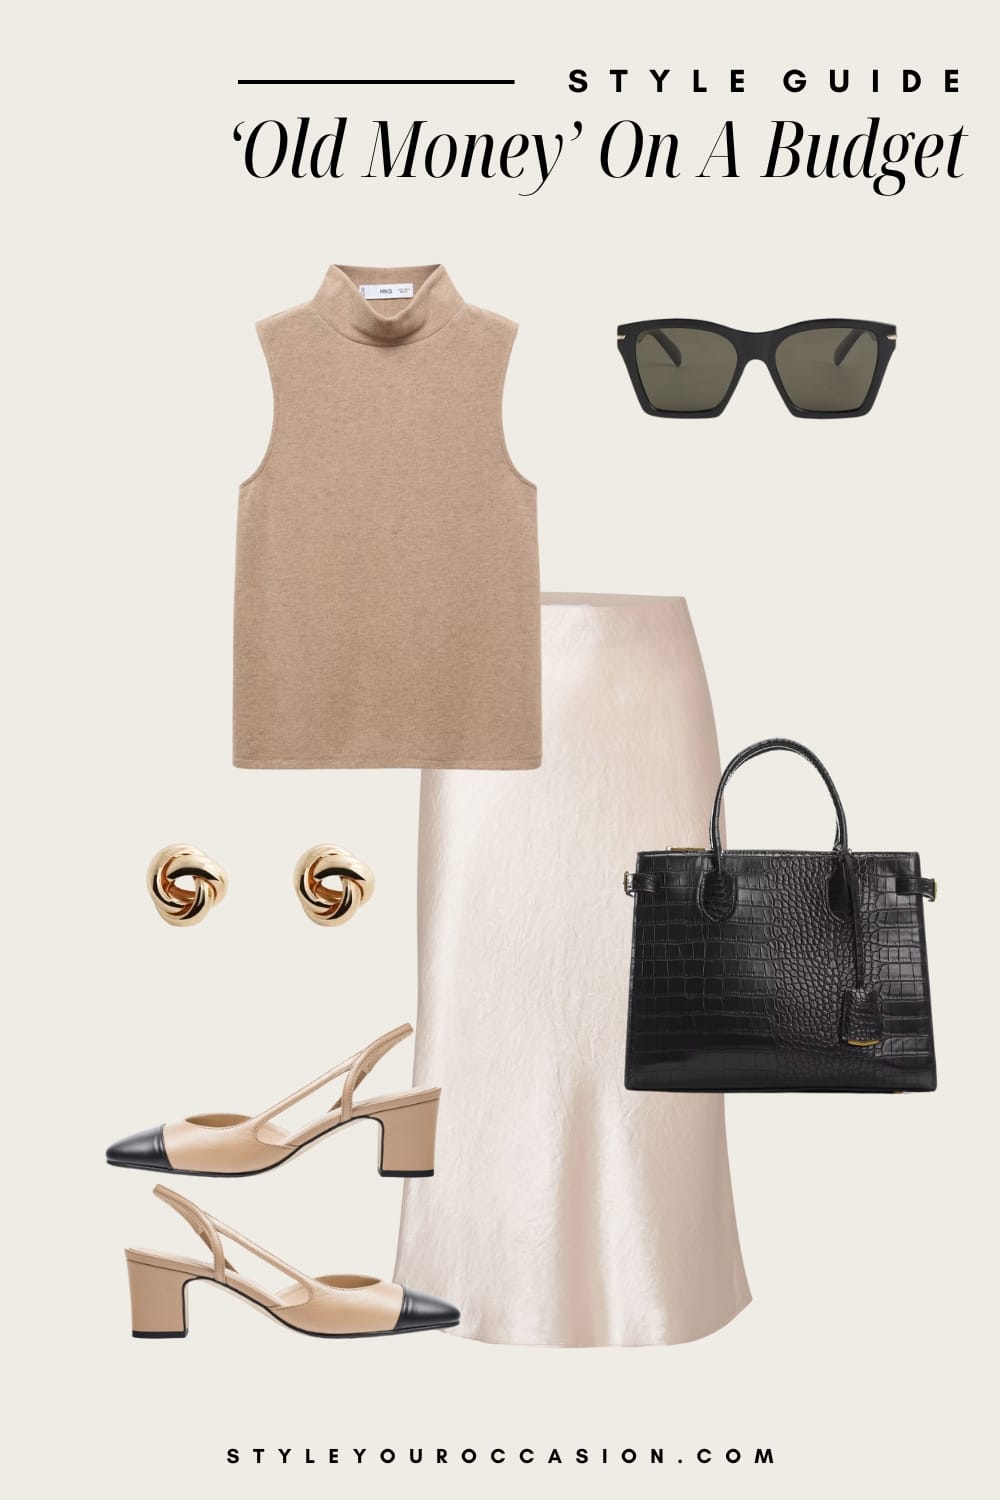 an image board of an old money outfit featuring a cream-colored satin midi skirt, a beige turtleneck sweater tank, black and beige cap toe block heels, and black and gold accessories